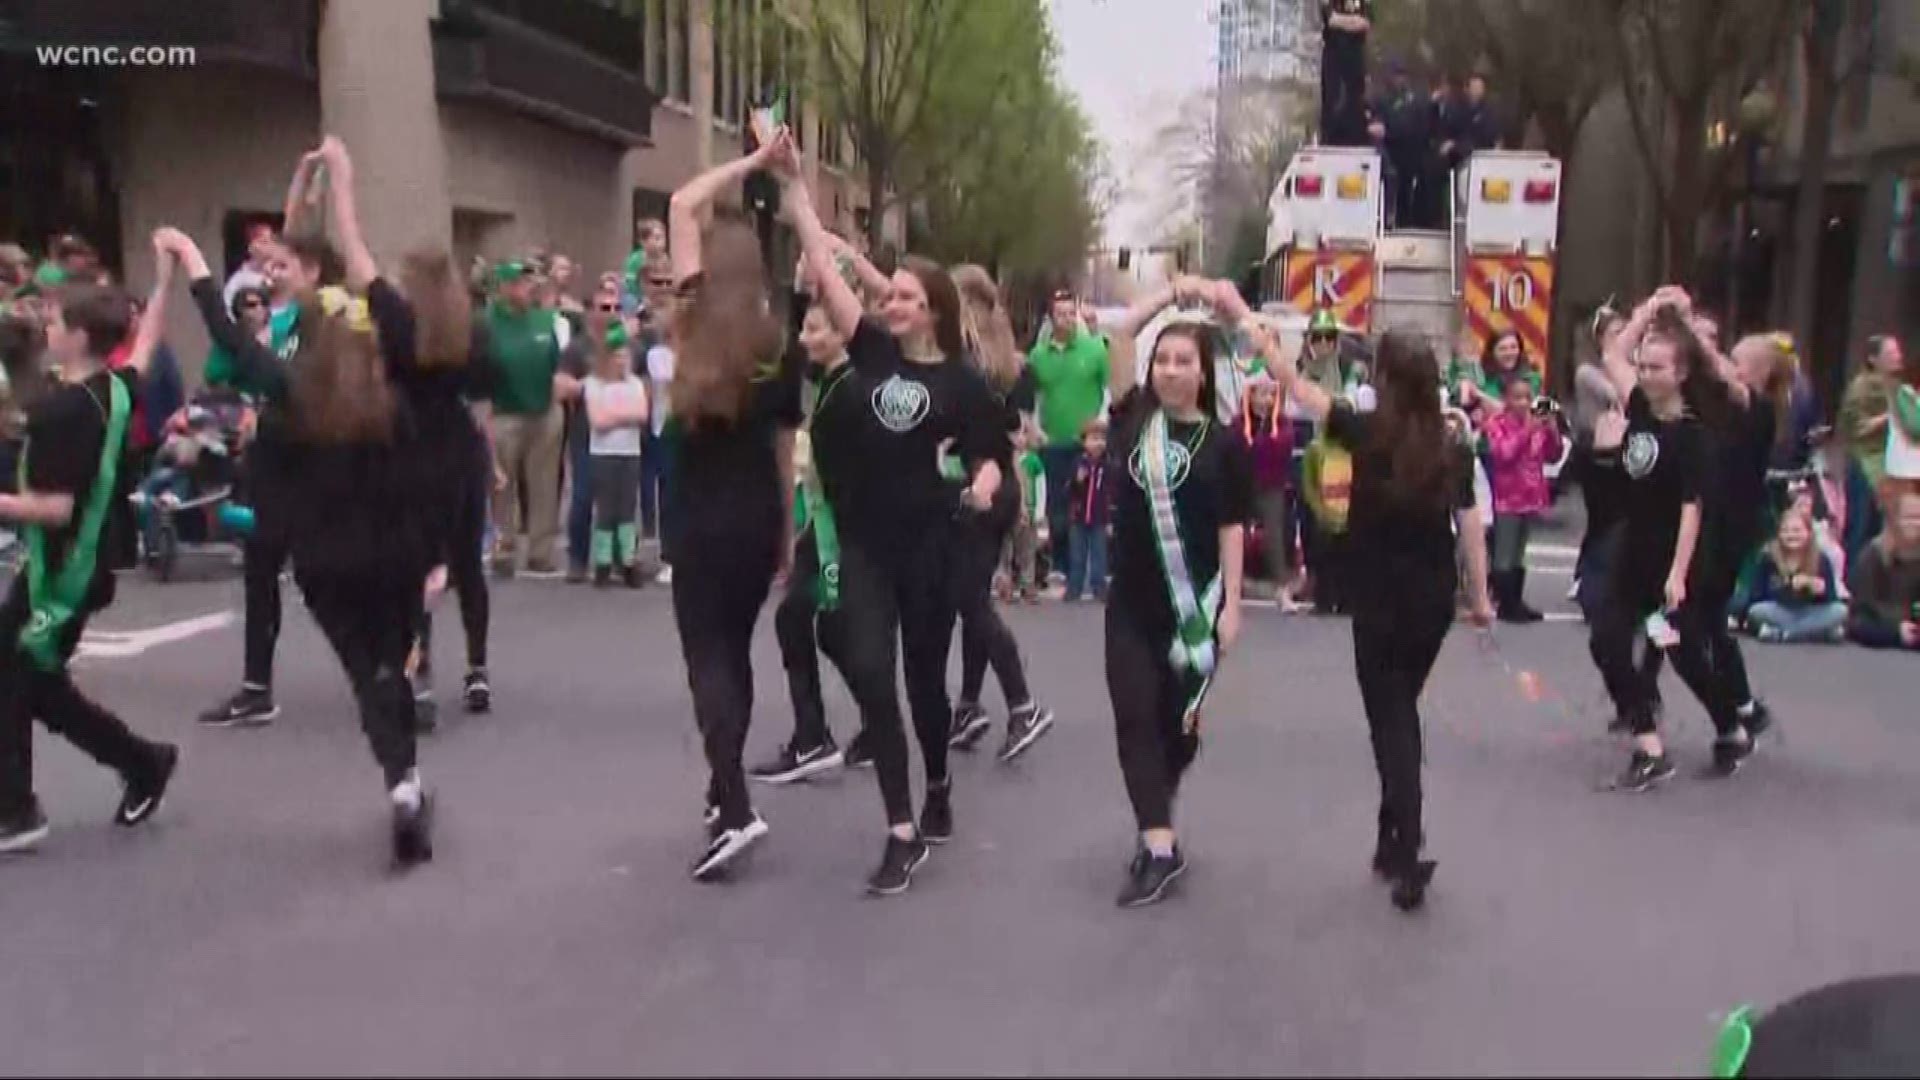 Charlotte will be bustling with people throughout the weekend as ACC and Saint Patrick's Day festivities come to a head.